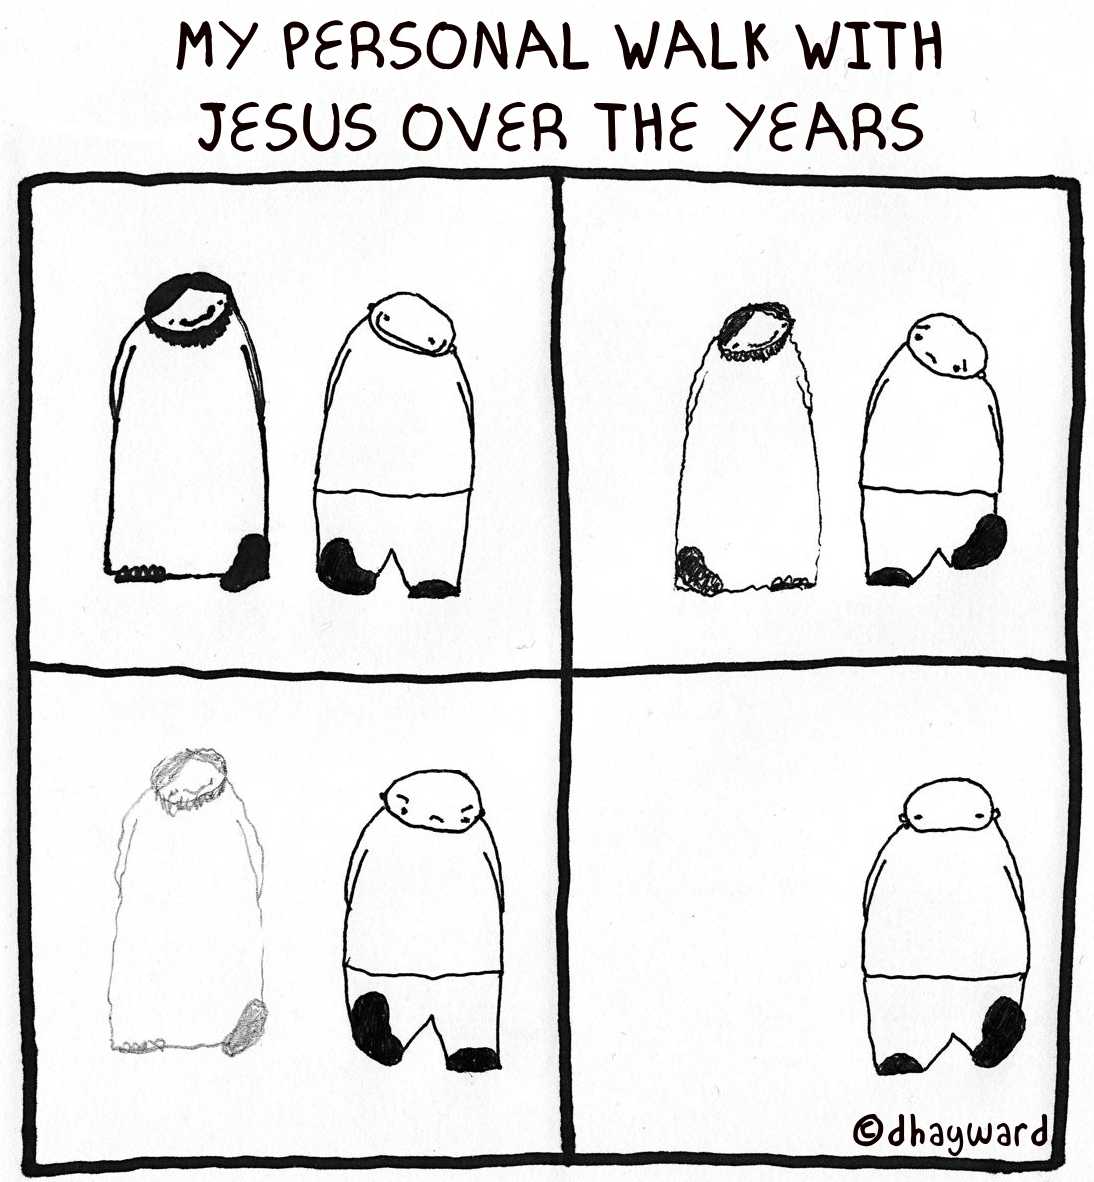 The End of the Jesus Journey?